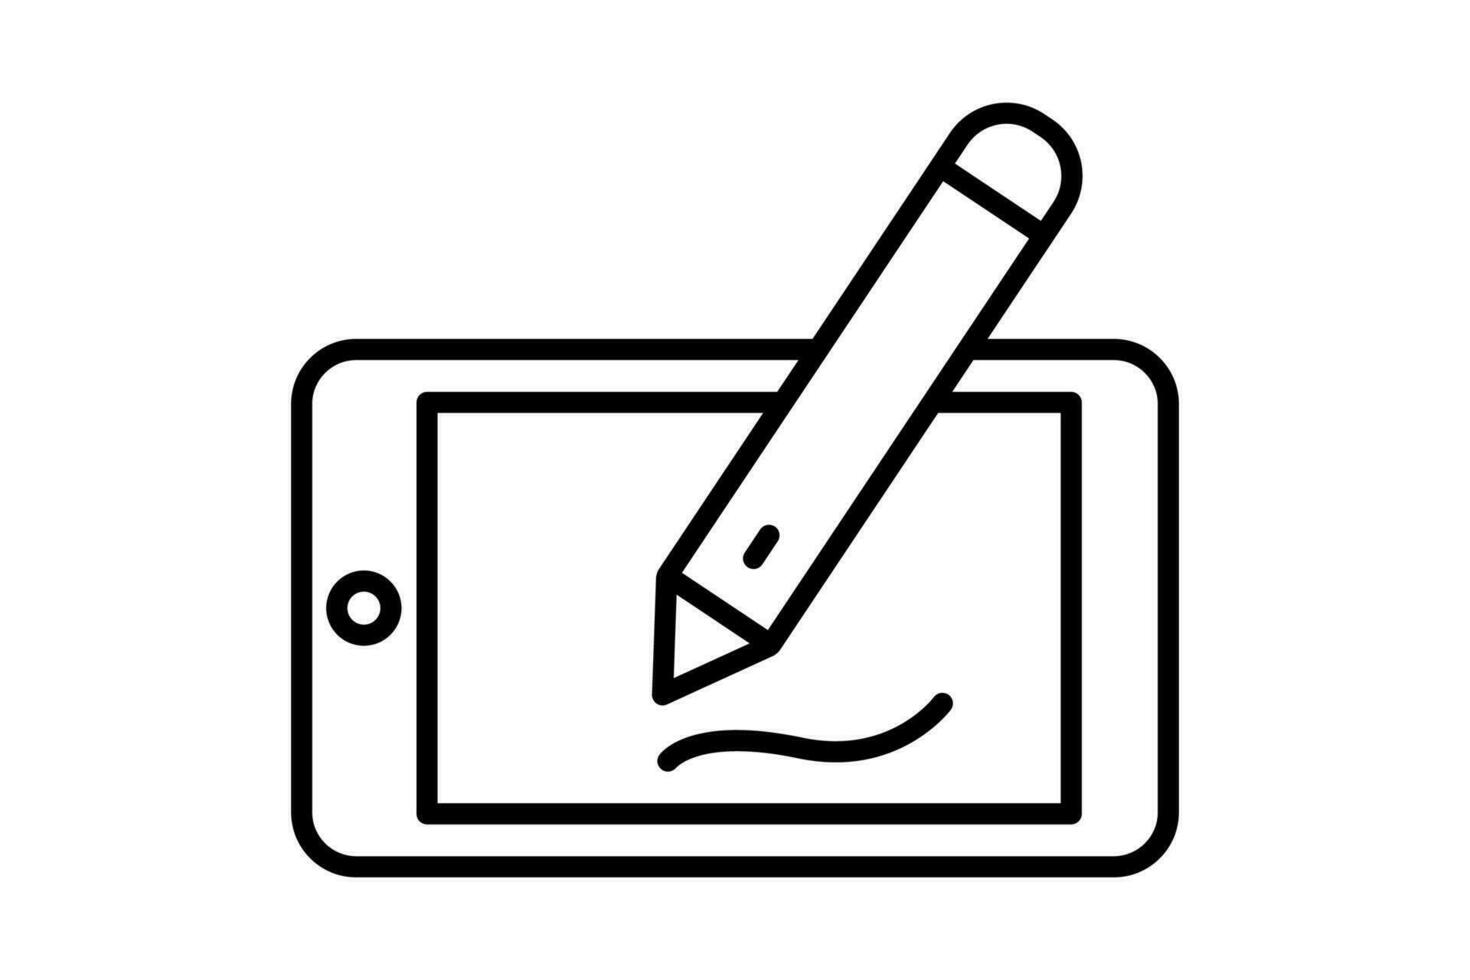 graphic tablet icon. icon related to device, computer technology. line icon style. simple vector design editable